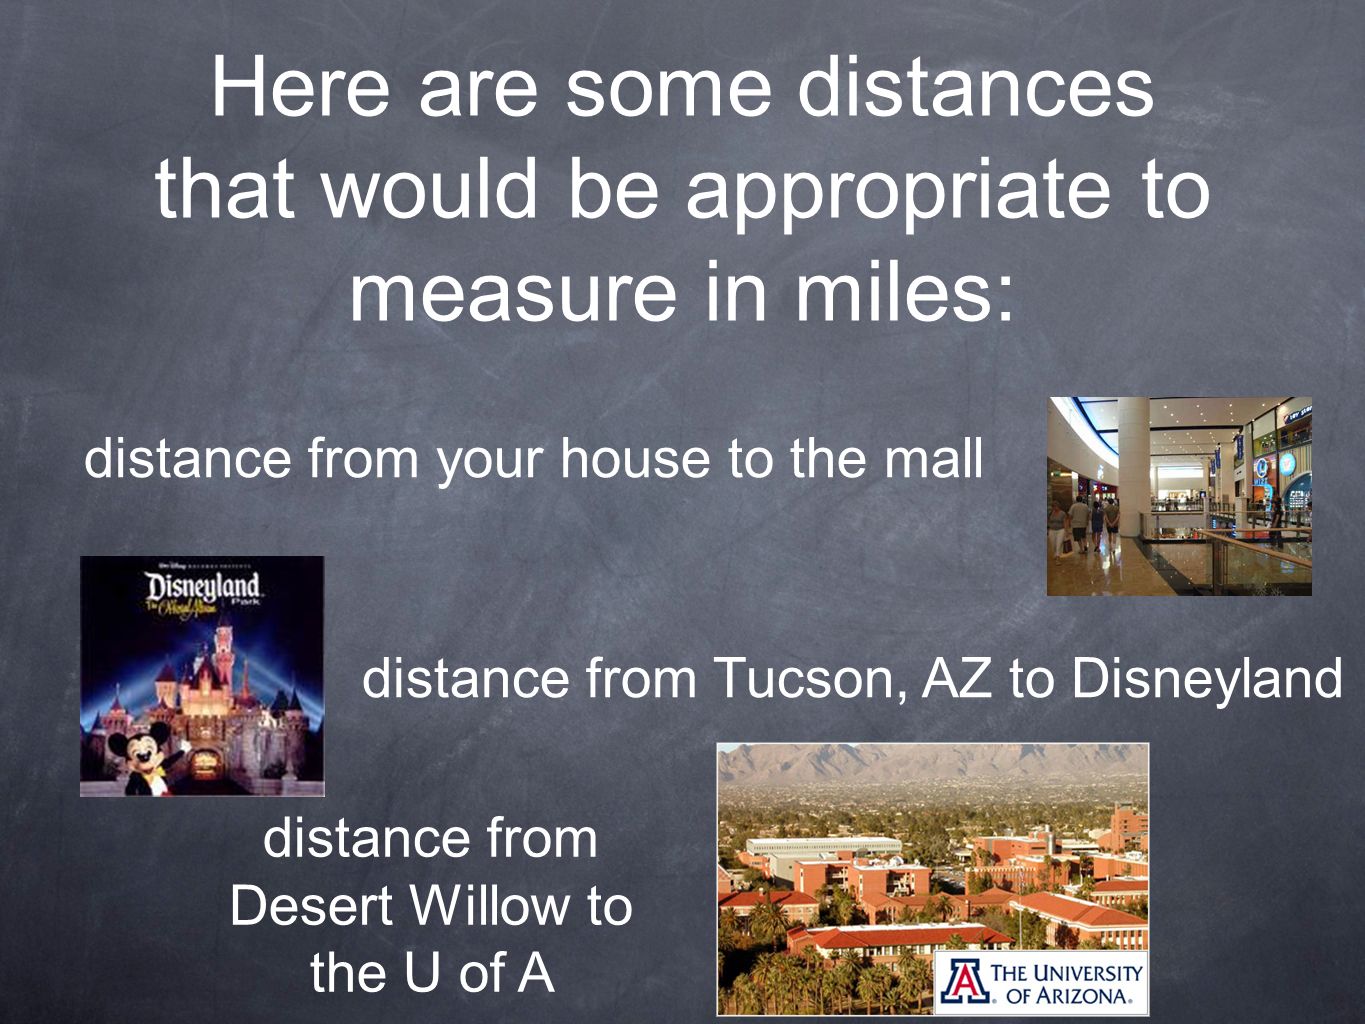 Here are some distances that would be appropriate to measure in miles: distance from your house to the mall distance from Tucson, AZ to Disneyland distance from Desert Willow to the U of A